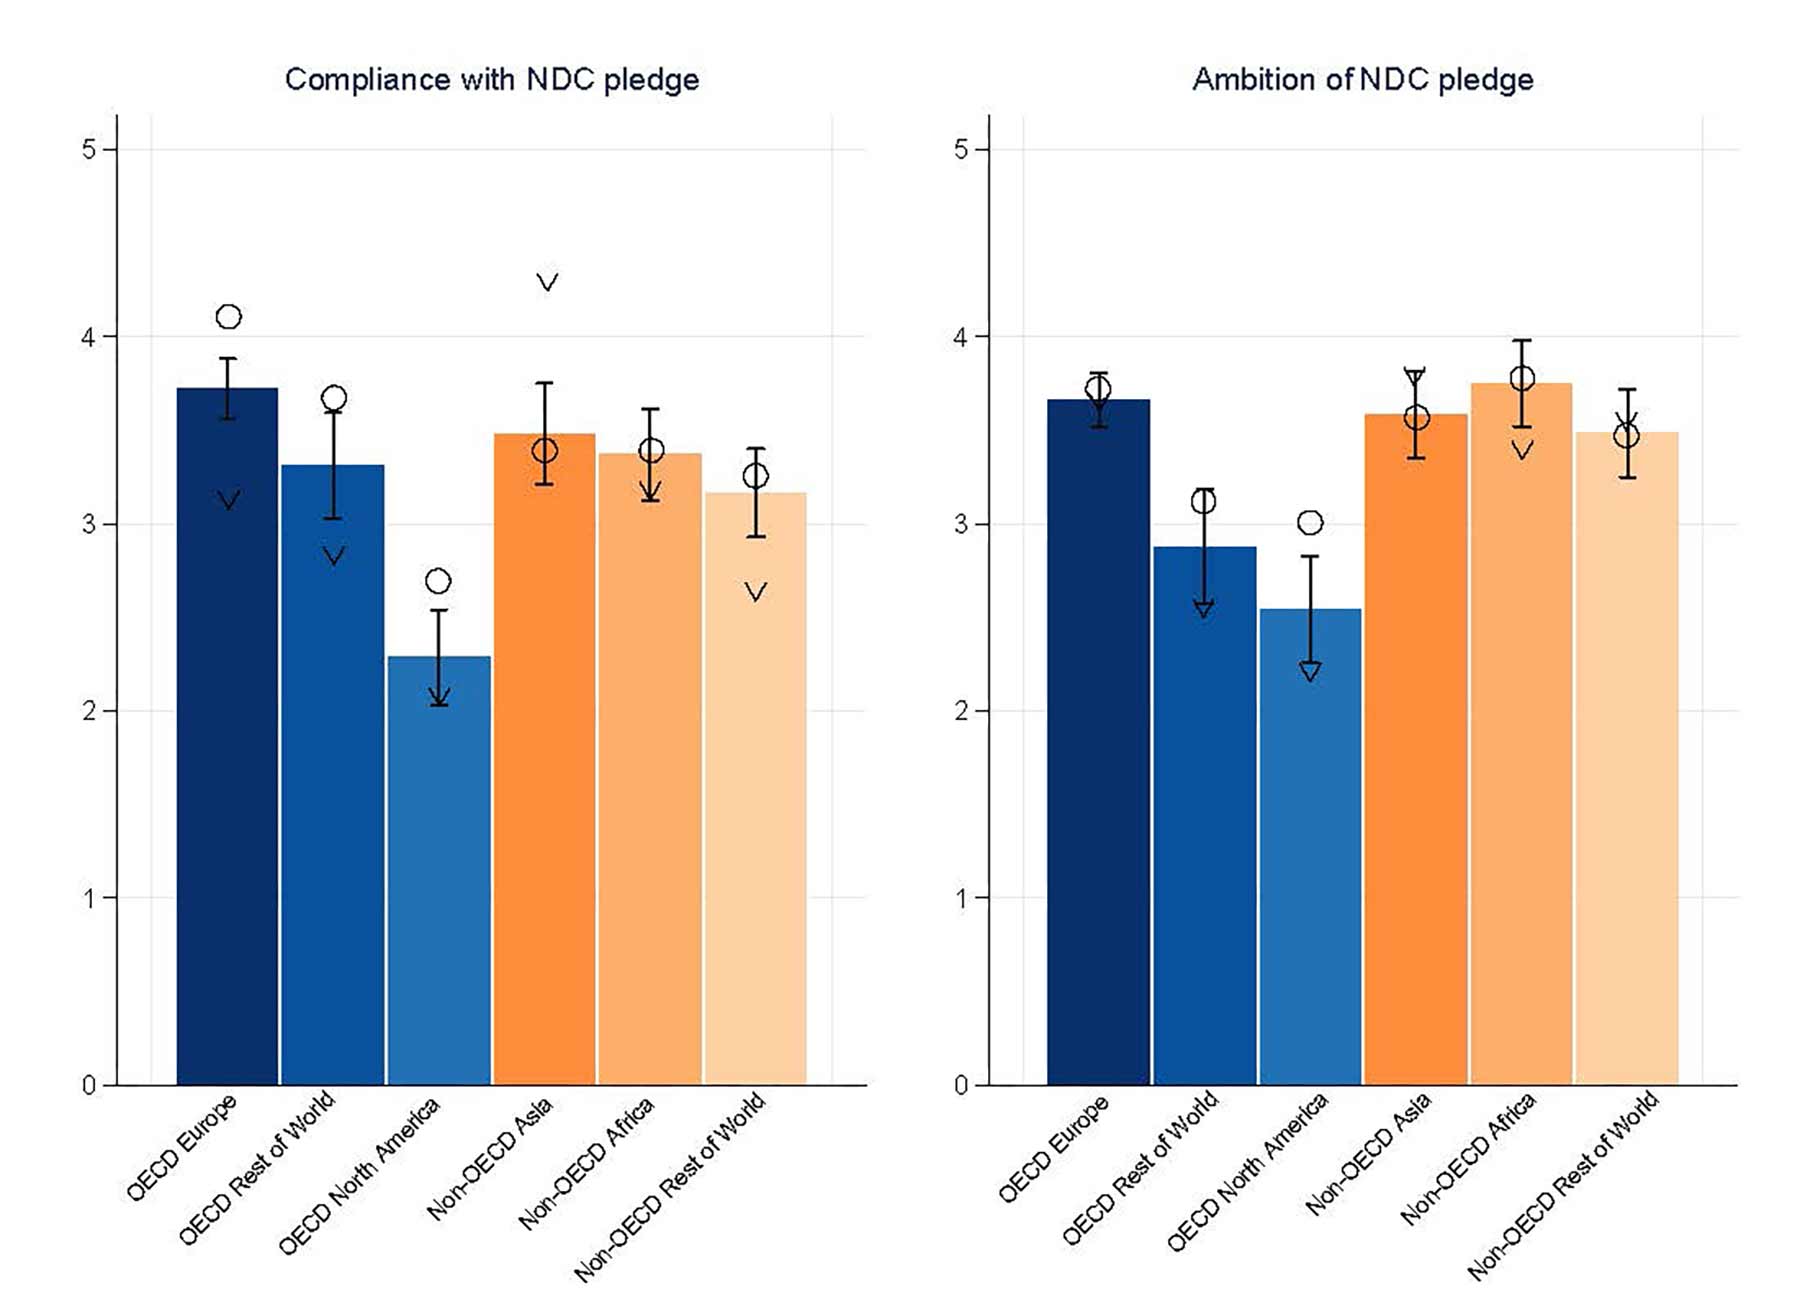 Graphs showing contenents' compliance and ambition with NDC pledge.